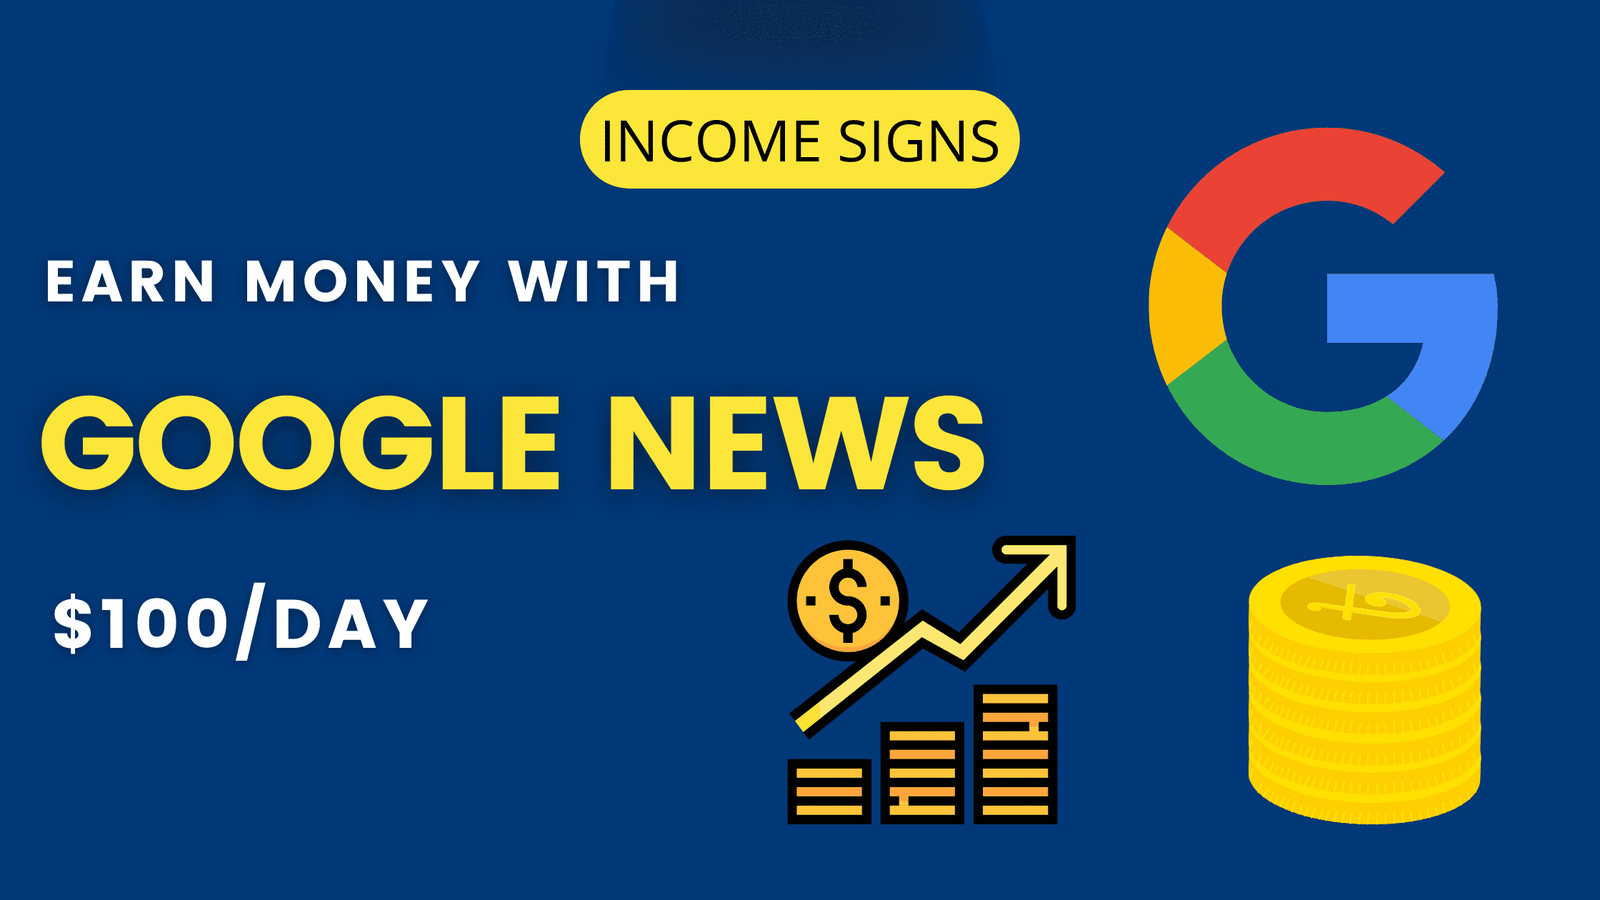 Tips to Make Money $100 Per Day with Google News